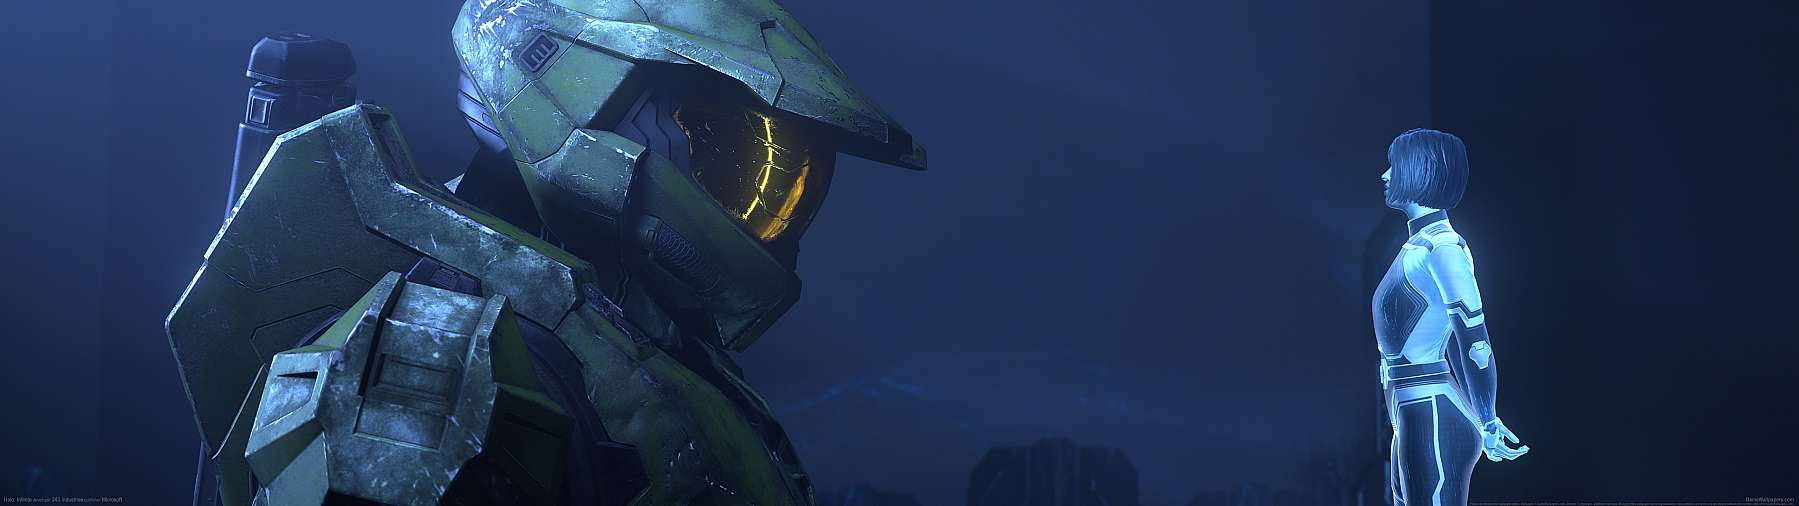 Halo: Infinite superwide wallpaper or background 10